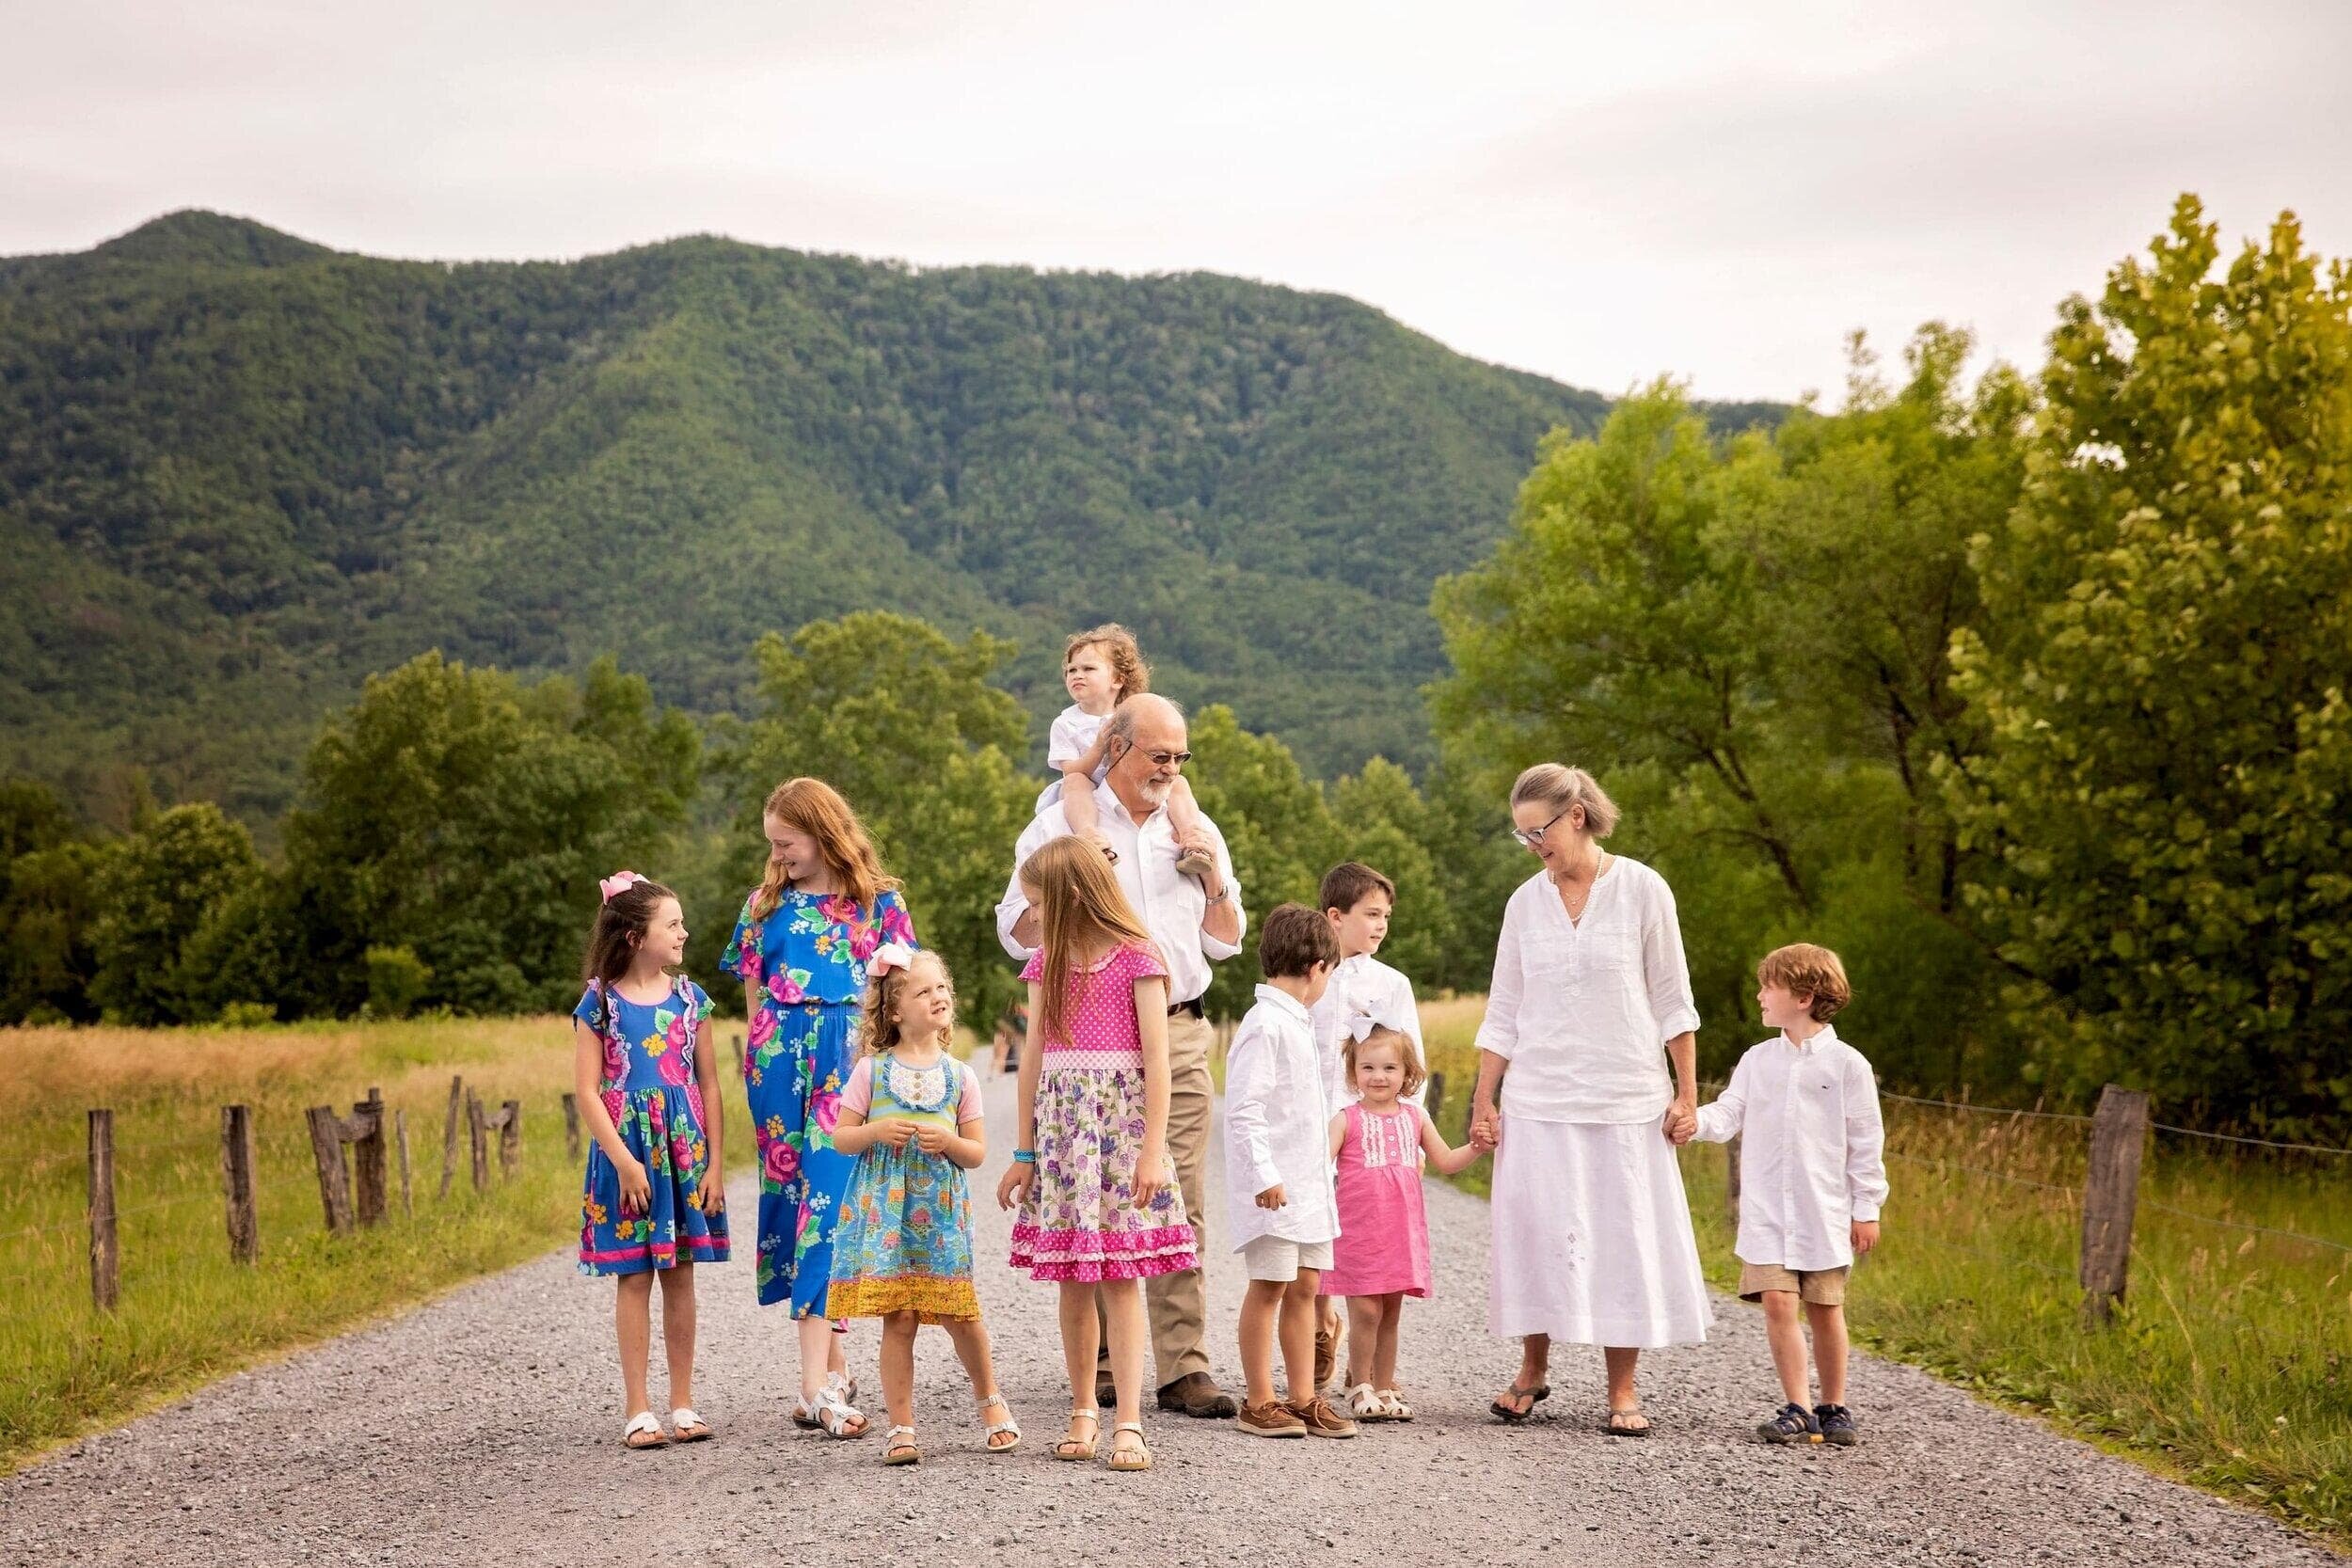 cades-cove-candid-large-family.jpg